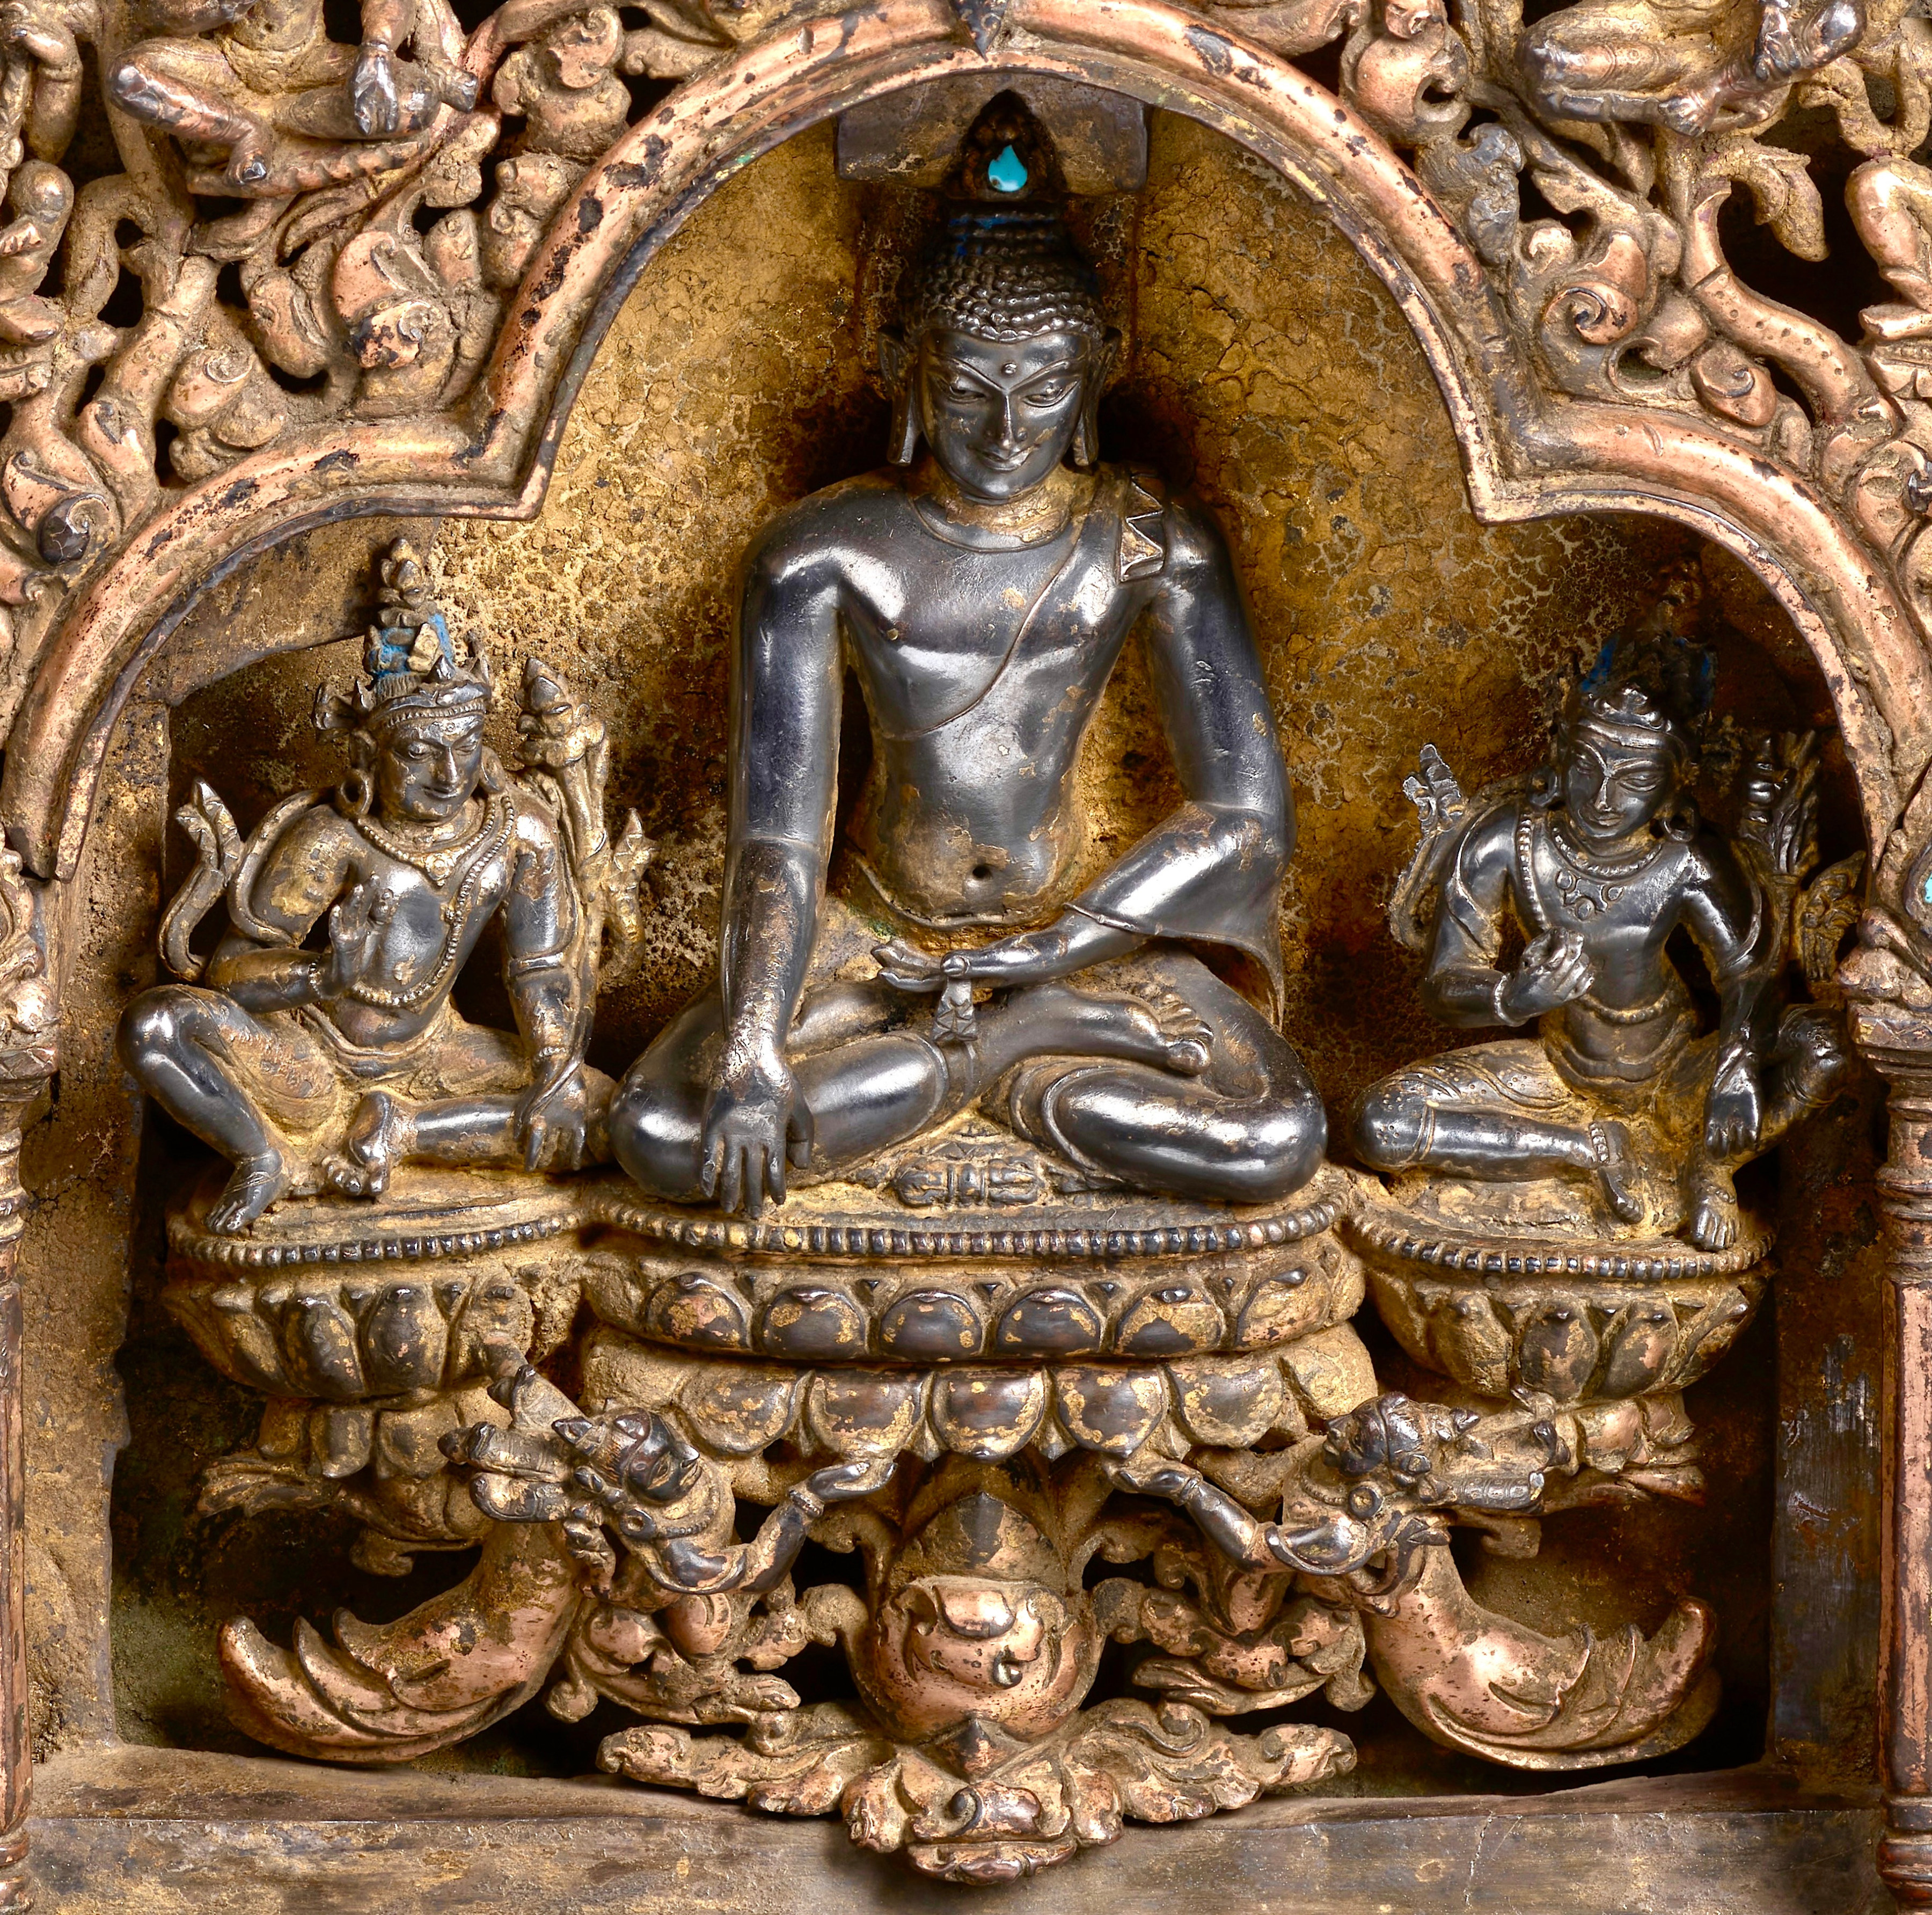 Detail of This plinth from an important eastern Indian stupa is assembled from four separately-cast gilt-copper arches (torana) with crouching elephants, rampant leogryphs, and jewel-topped pillars supporting trilobate spans, makara at either end of the crossbars, bodhisattvas and celestial figures above, and with kirtimukha at the apex.  